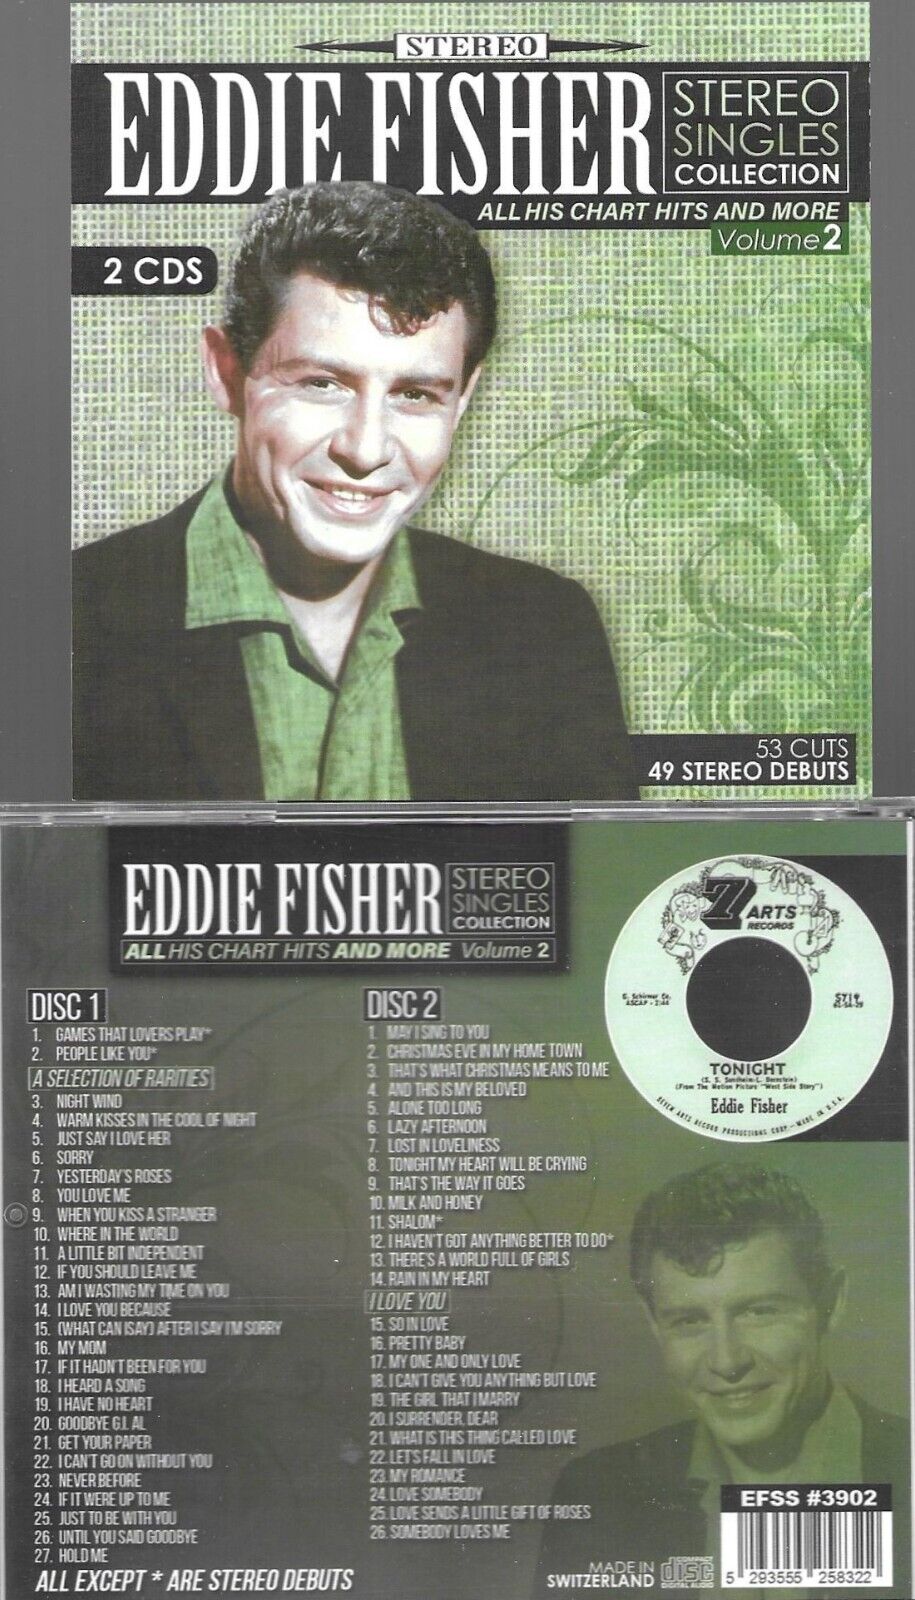 EDDIE FISHER-STEREO SINGLES COLLECTION V.2-ALL HIS CHART HITS & MORE-53 CUTS-2CD